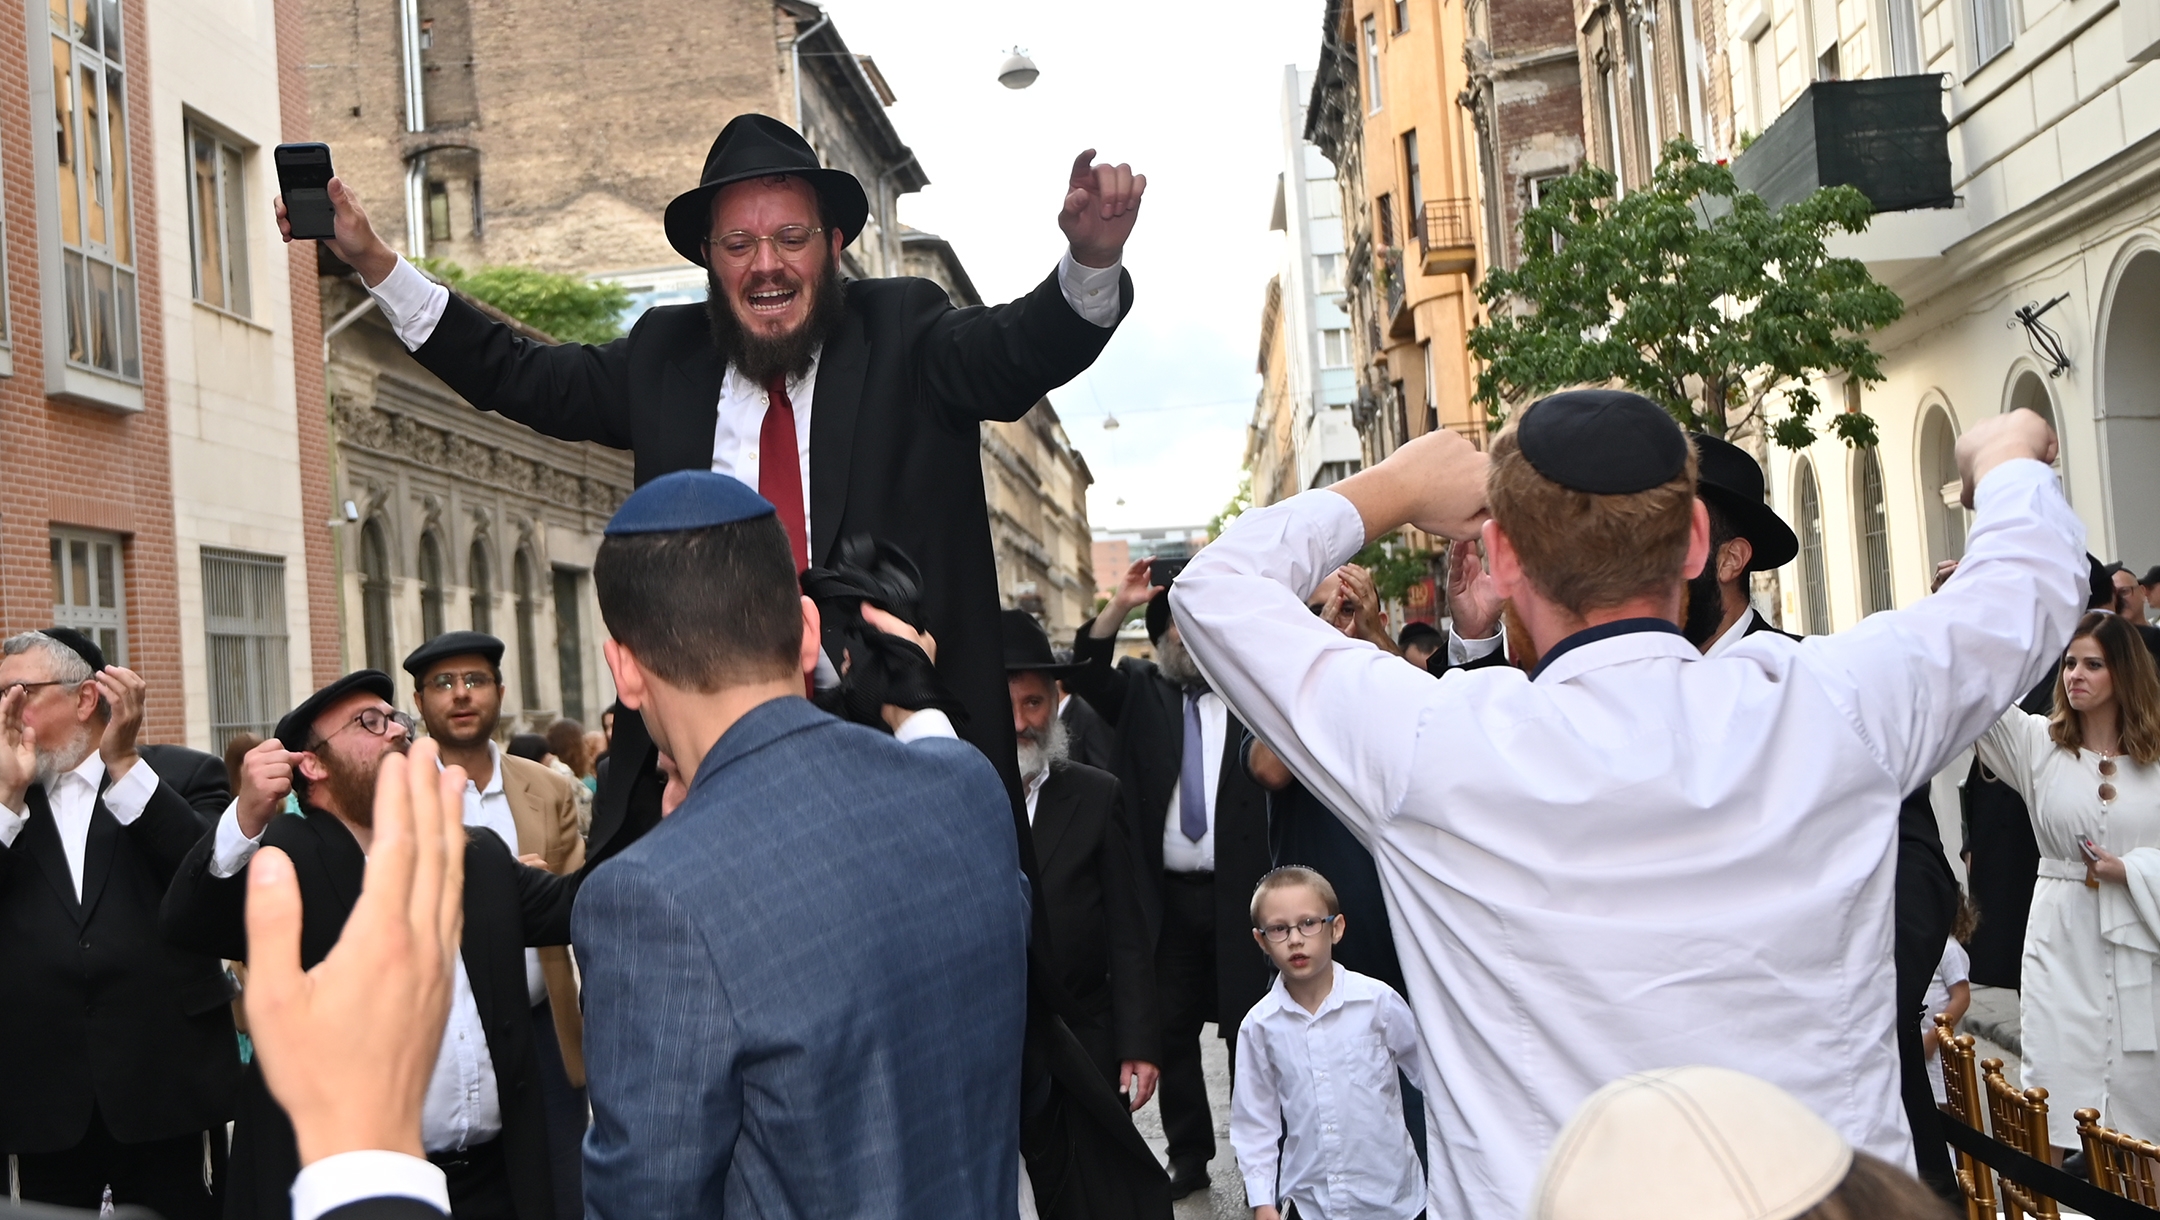 Rabbi Shmulik Oirechman dancing on the shoulders of other Jews at the opening of the Vorosmarty Street Synagogue in Budapest, Hungary on Aug. 27, 2021. (Cnaan Liphshiz)